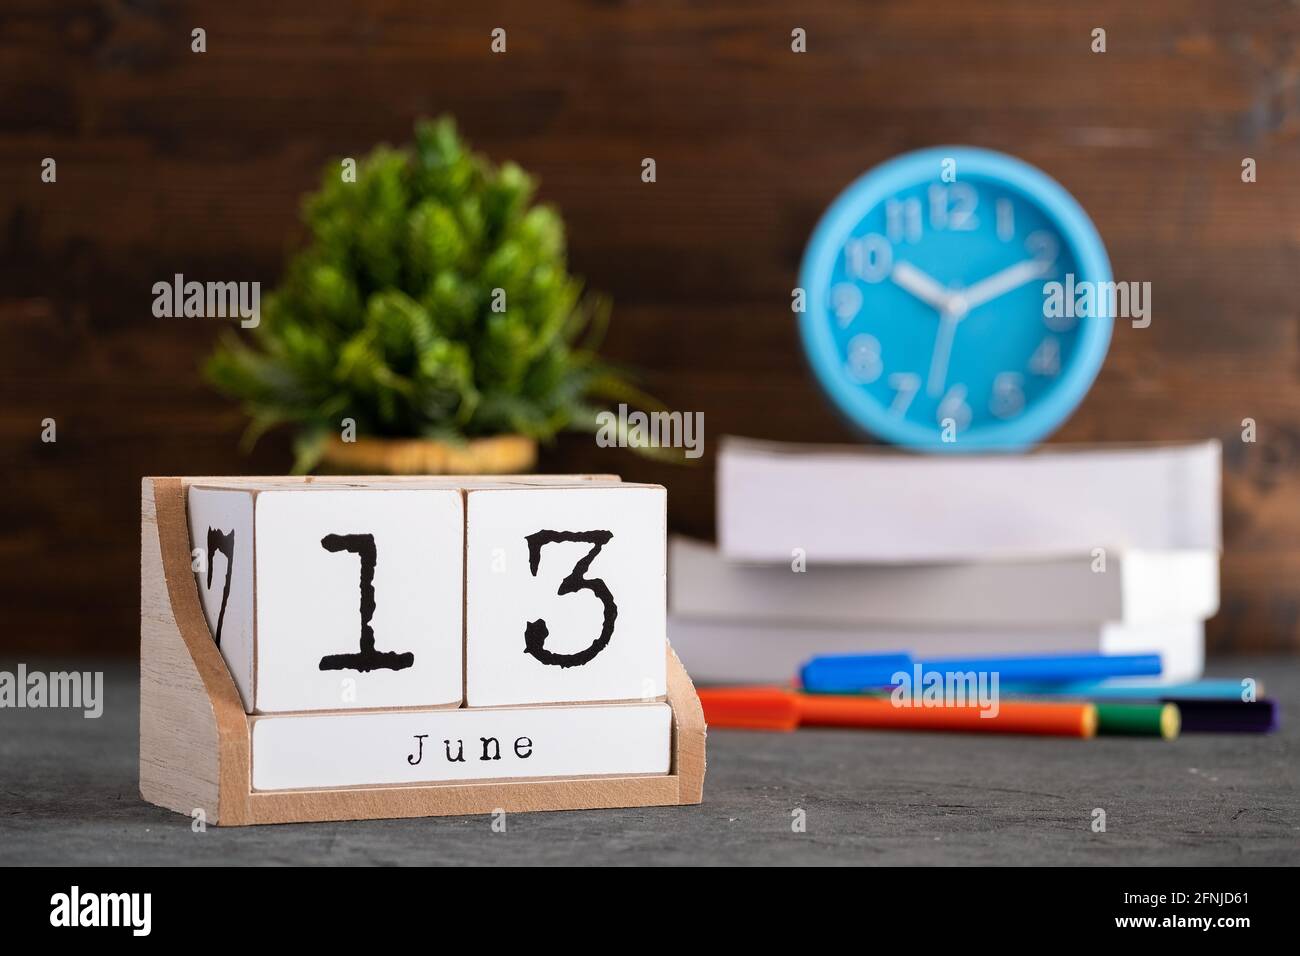 June 13. June 13 wooden cube calendar with blur objects on background. Stock Photo